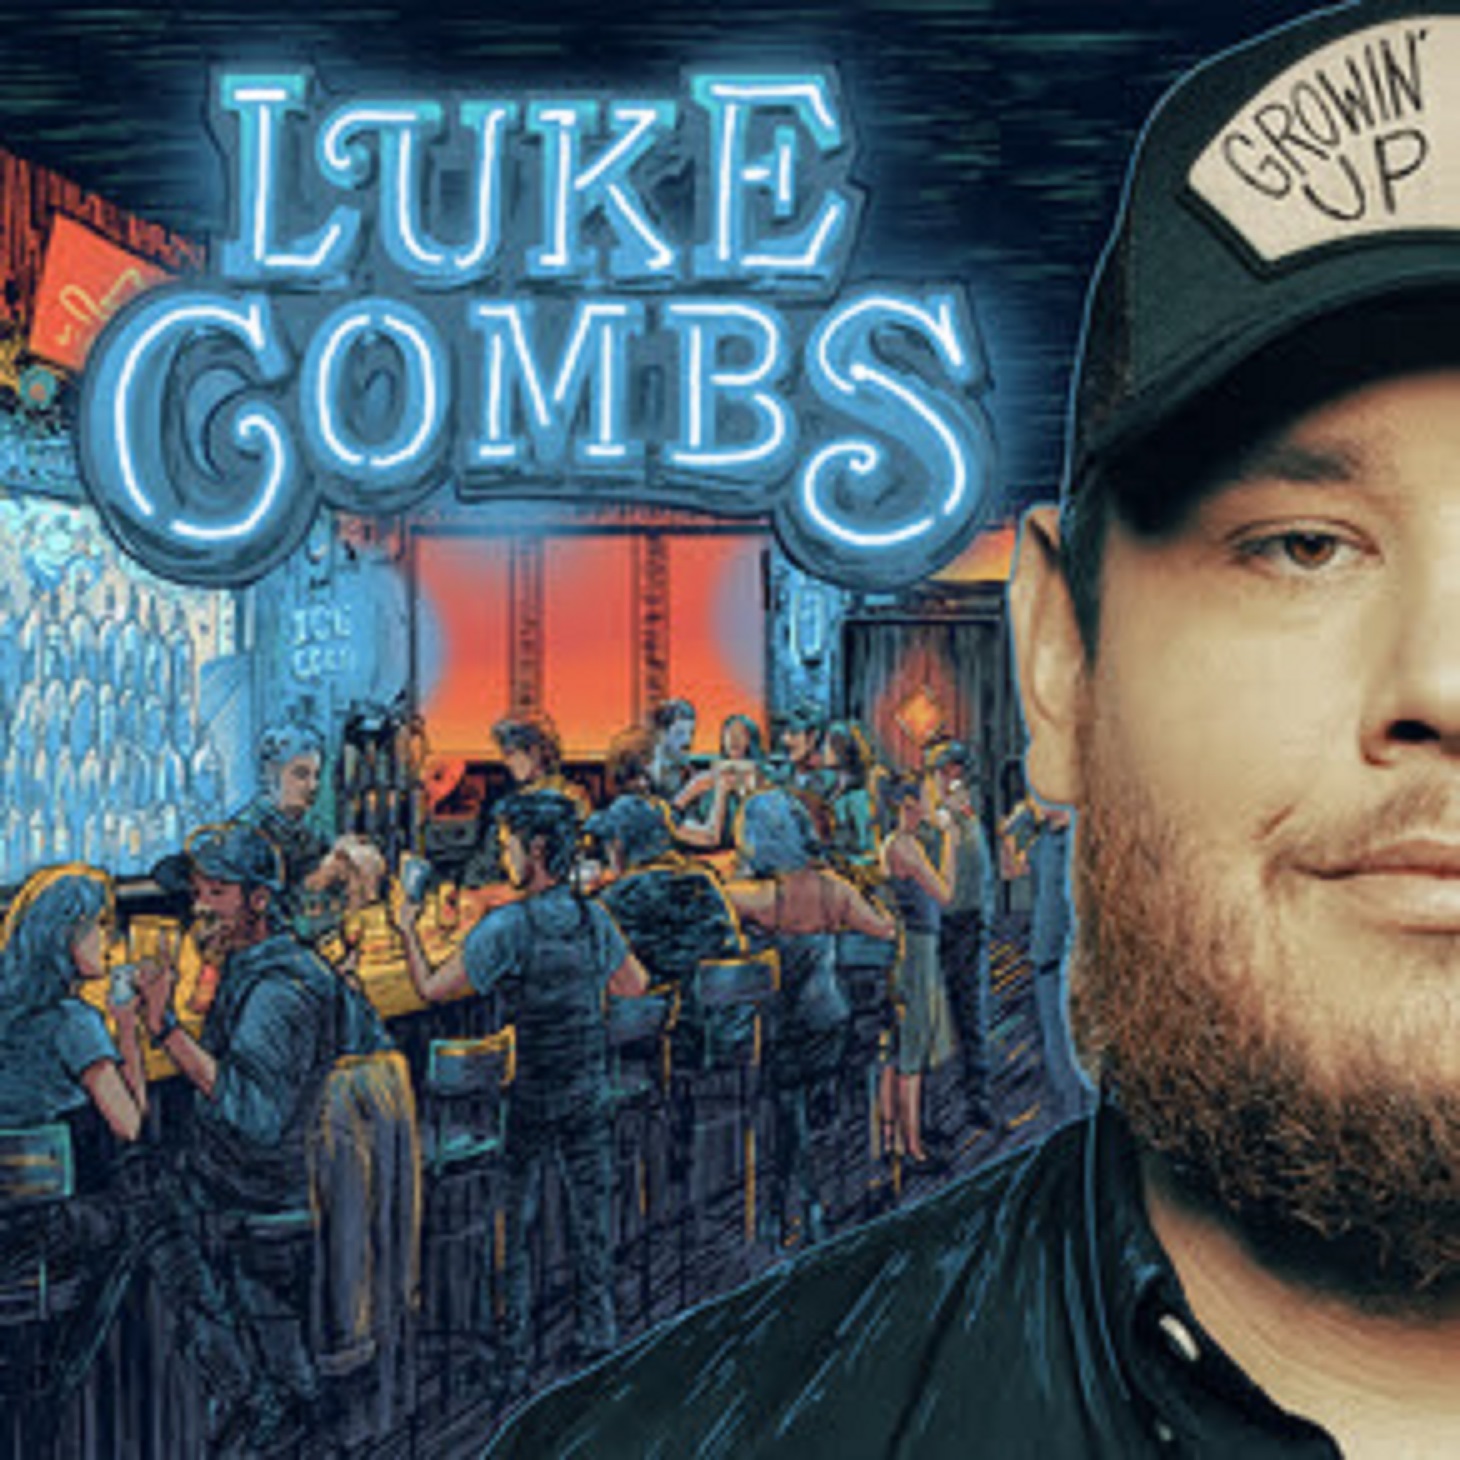 Luke Combs’ new song “5 Leaf Clover” out today